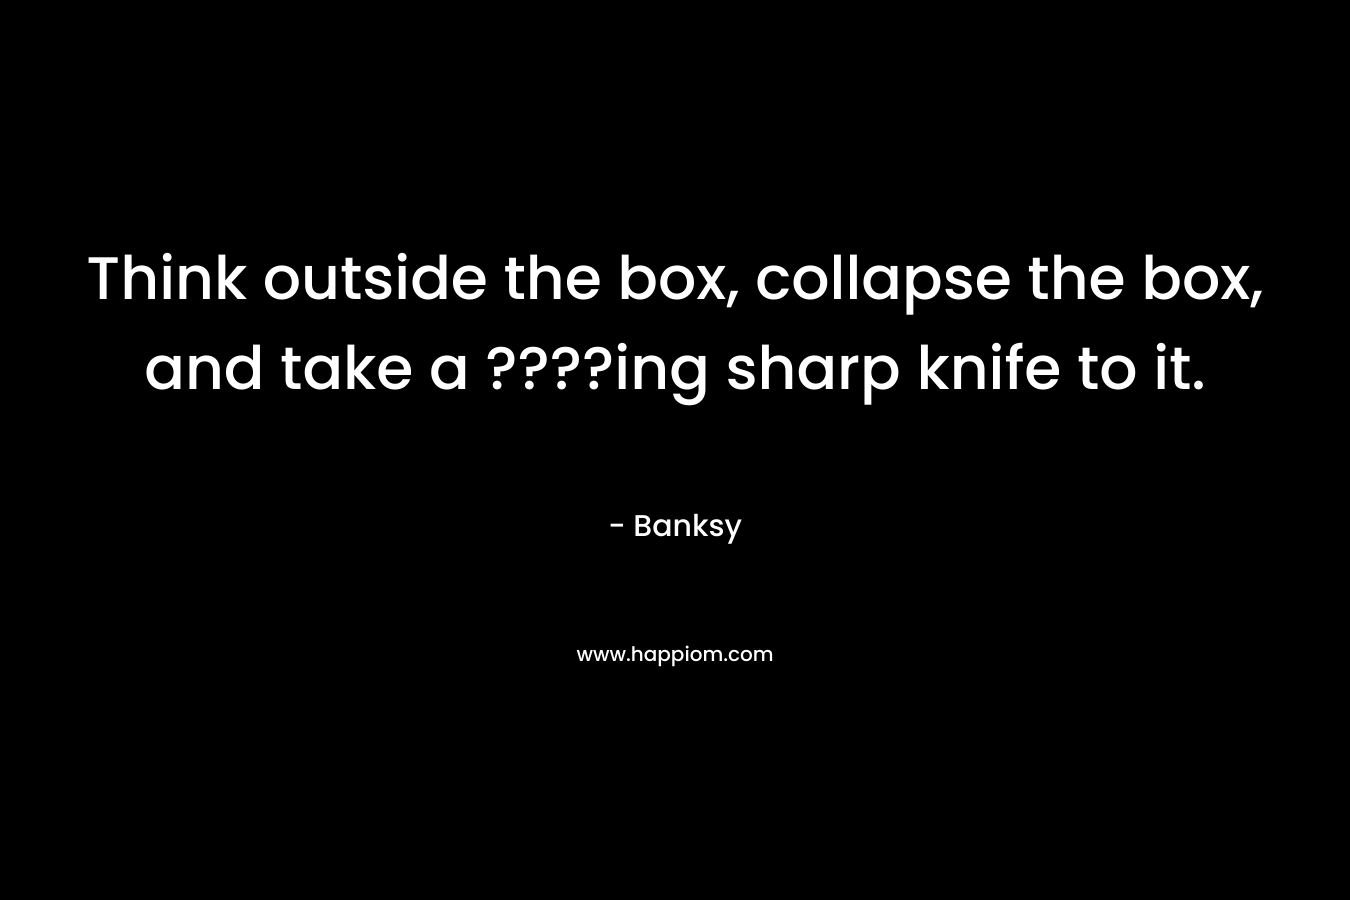 Think outside the box, collapse the box, and take a ????ing sharp knife to it. – Banksy